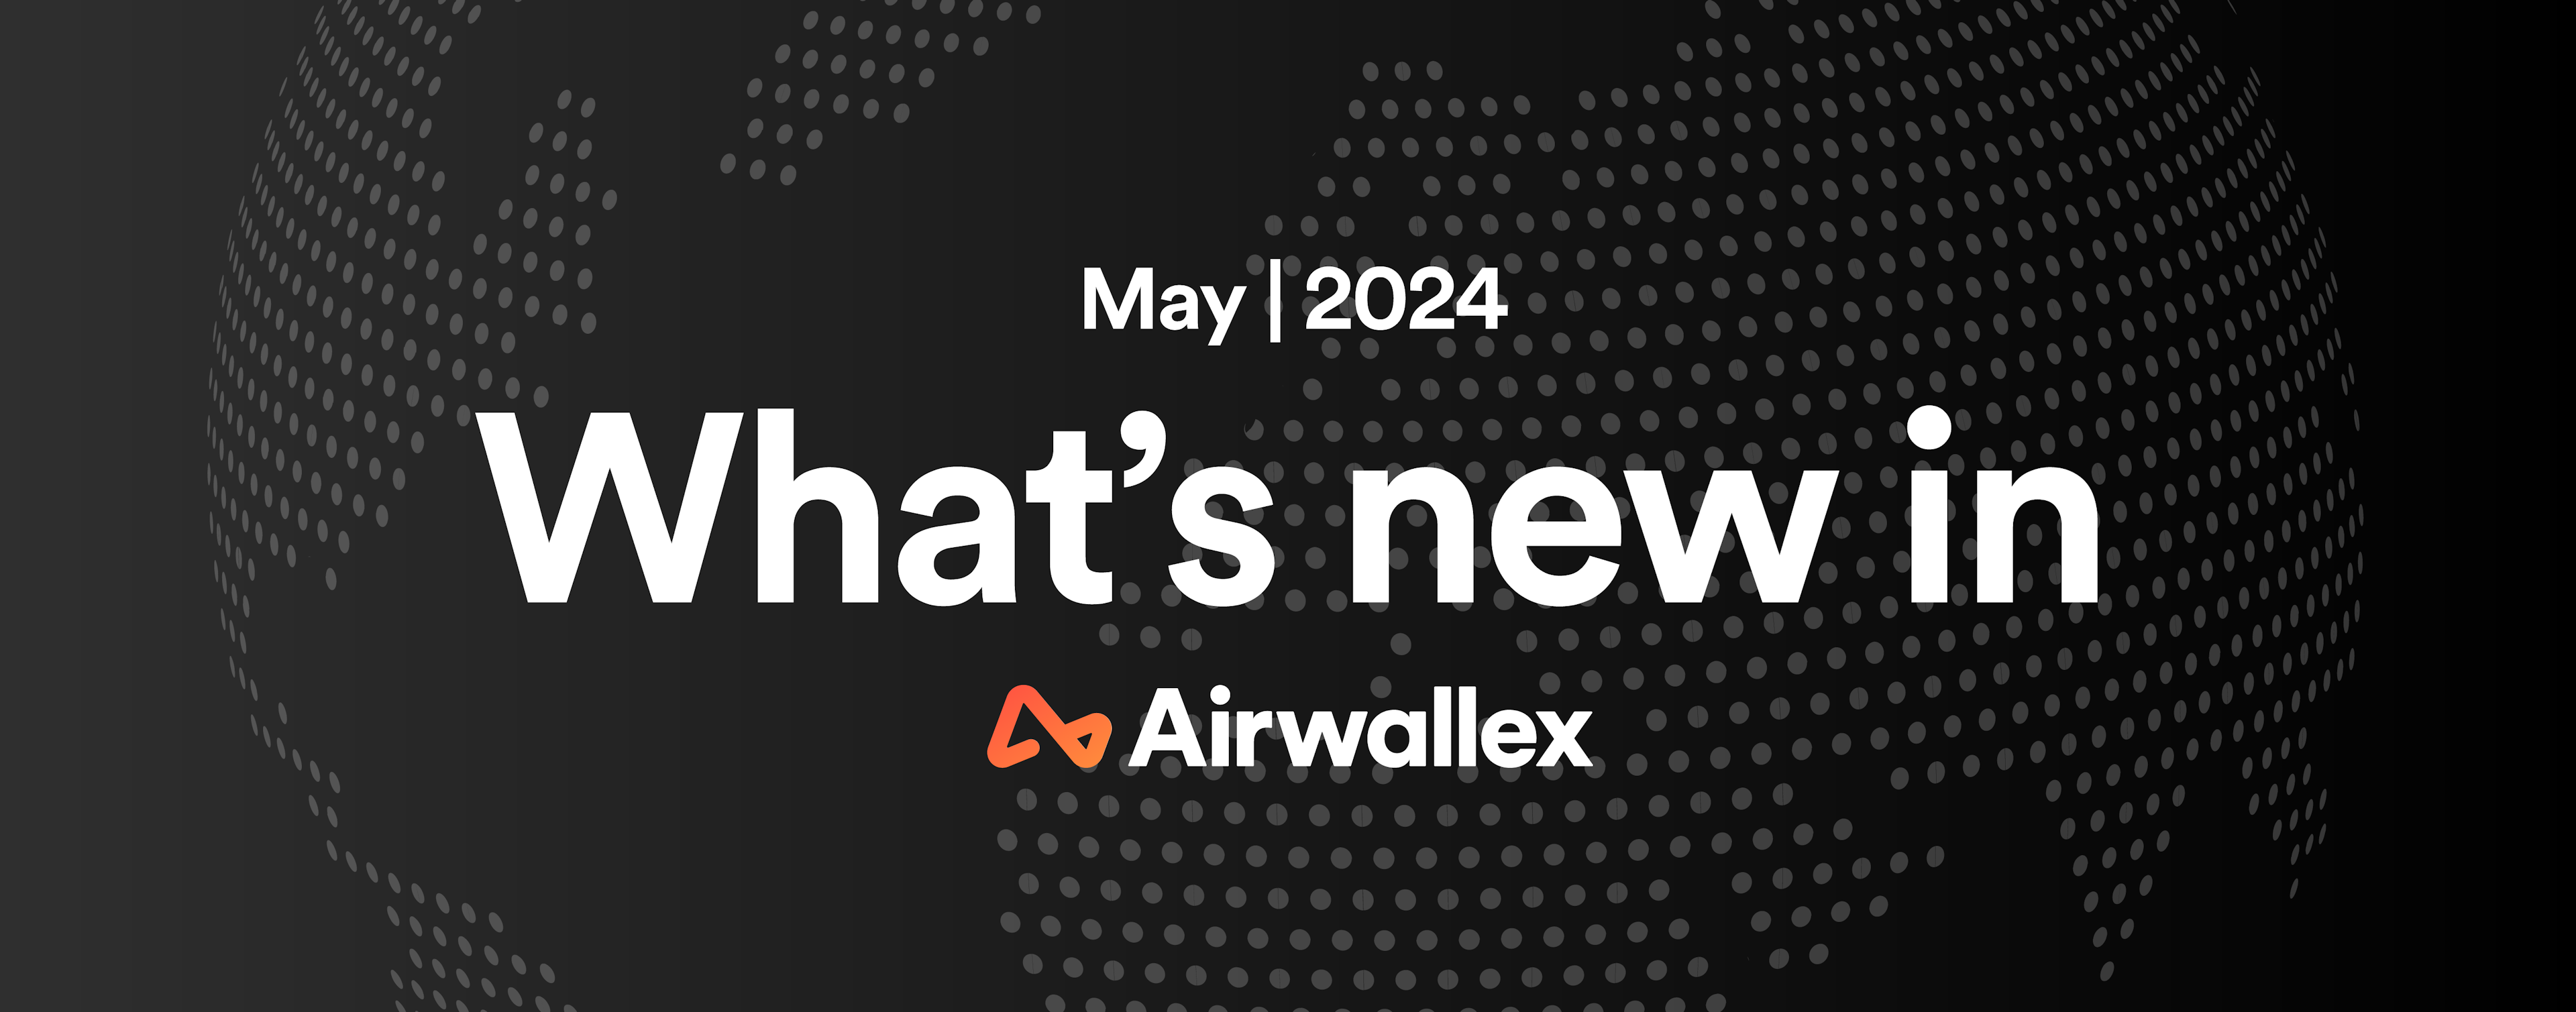 Airwallex May release notes image